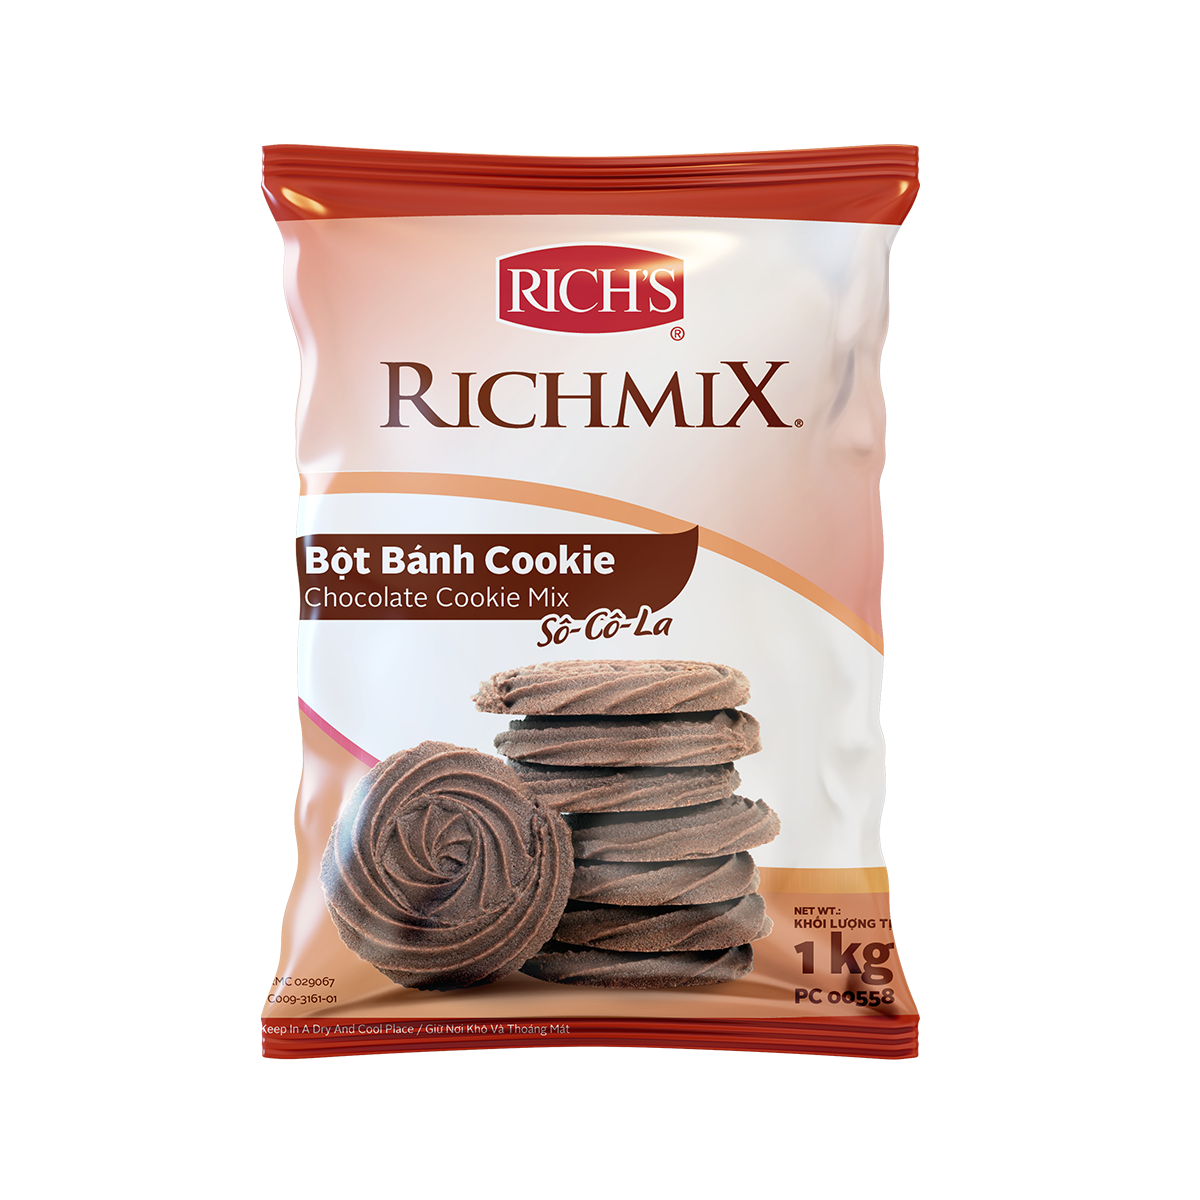 Chocolate Cookie Mix